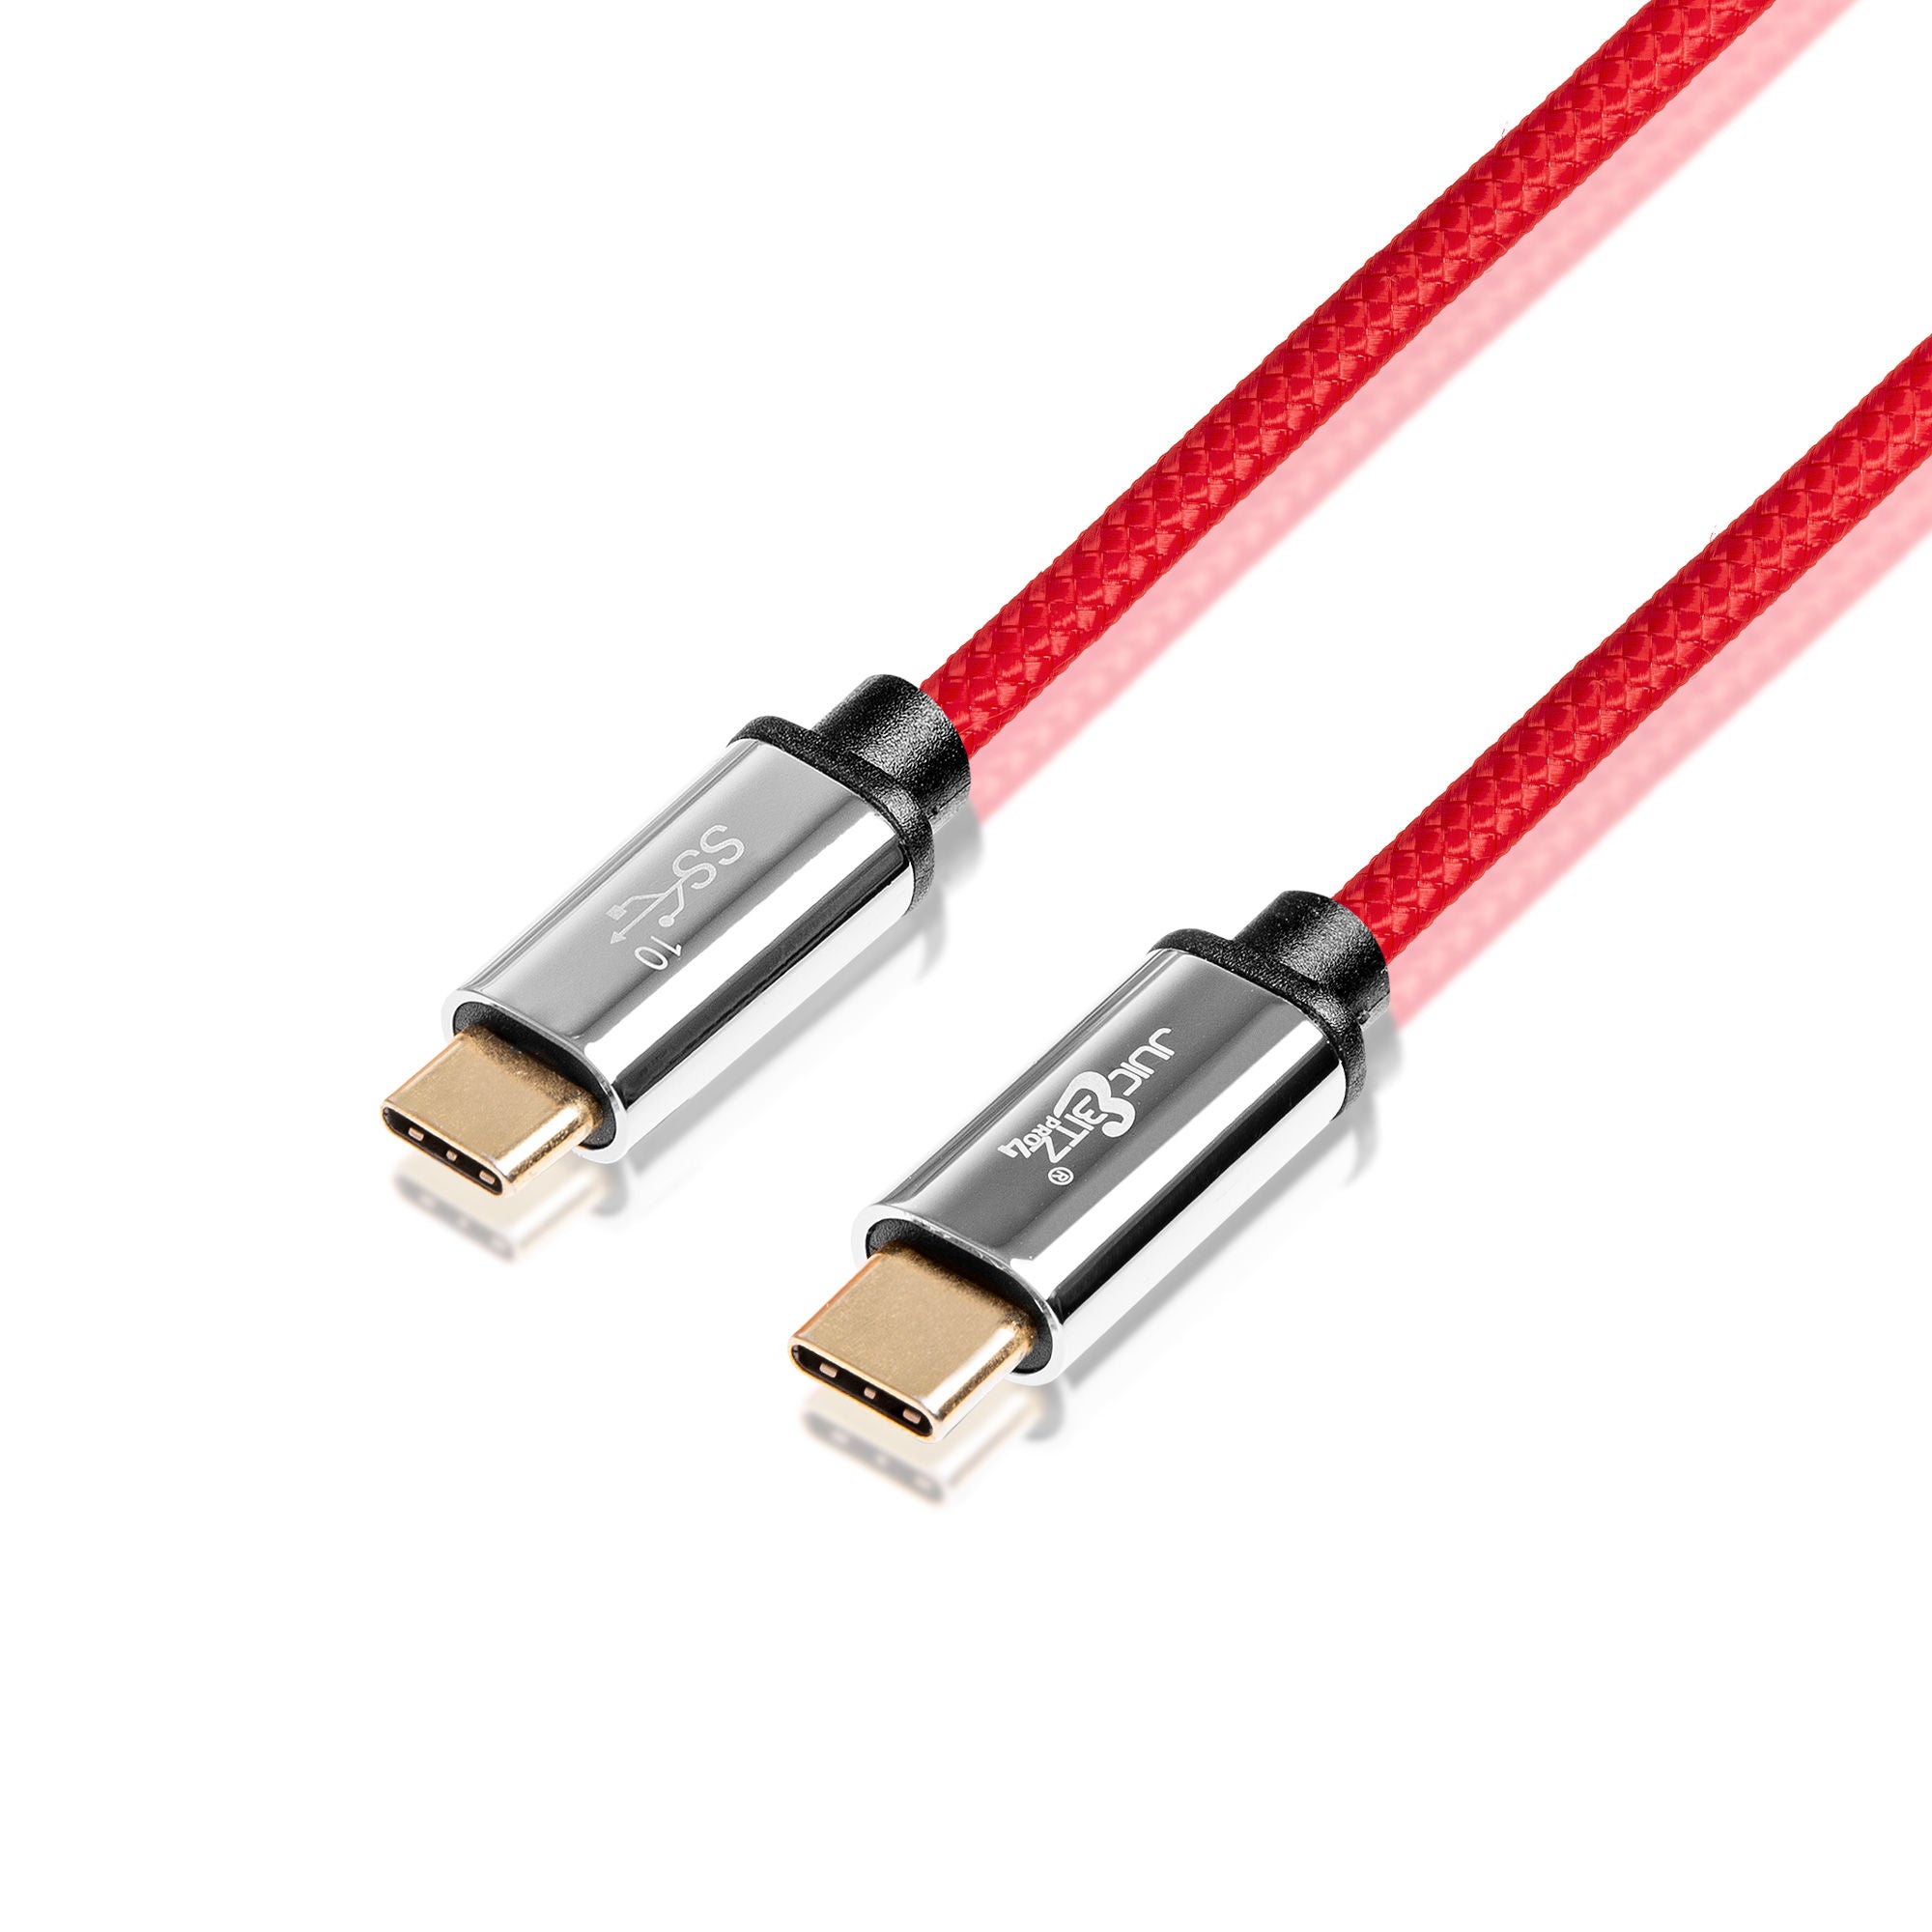 PRO Series 100W USB-C to USB-C Ultra Fast Charger Cable HDMI USB3.1 Data 10Gbps Braided Lead - Red